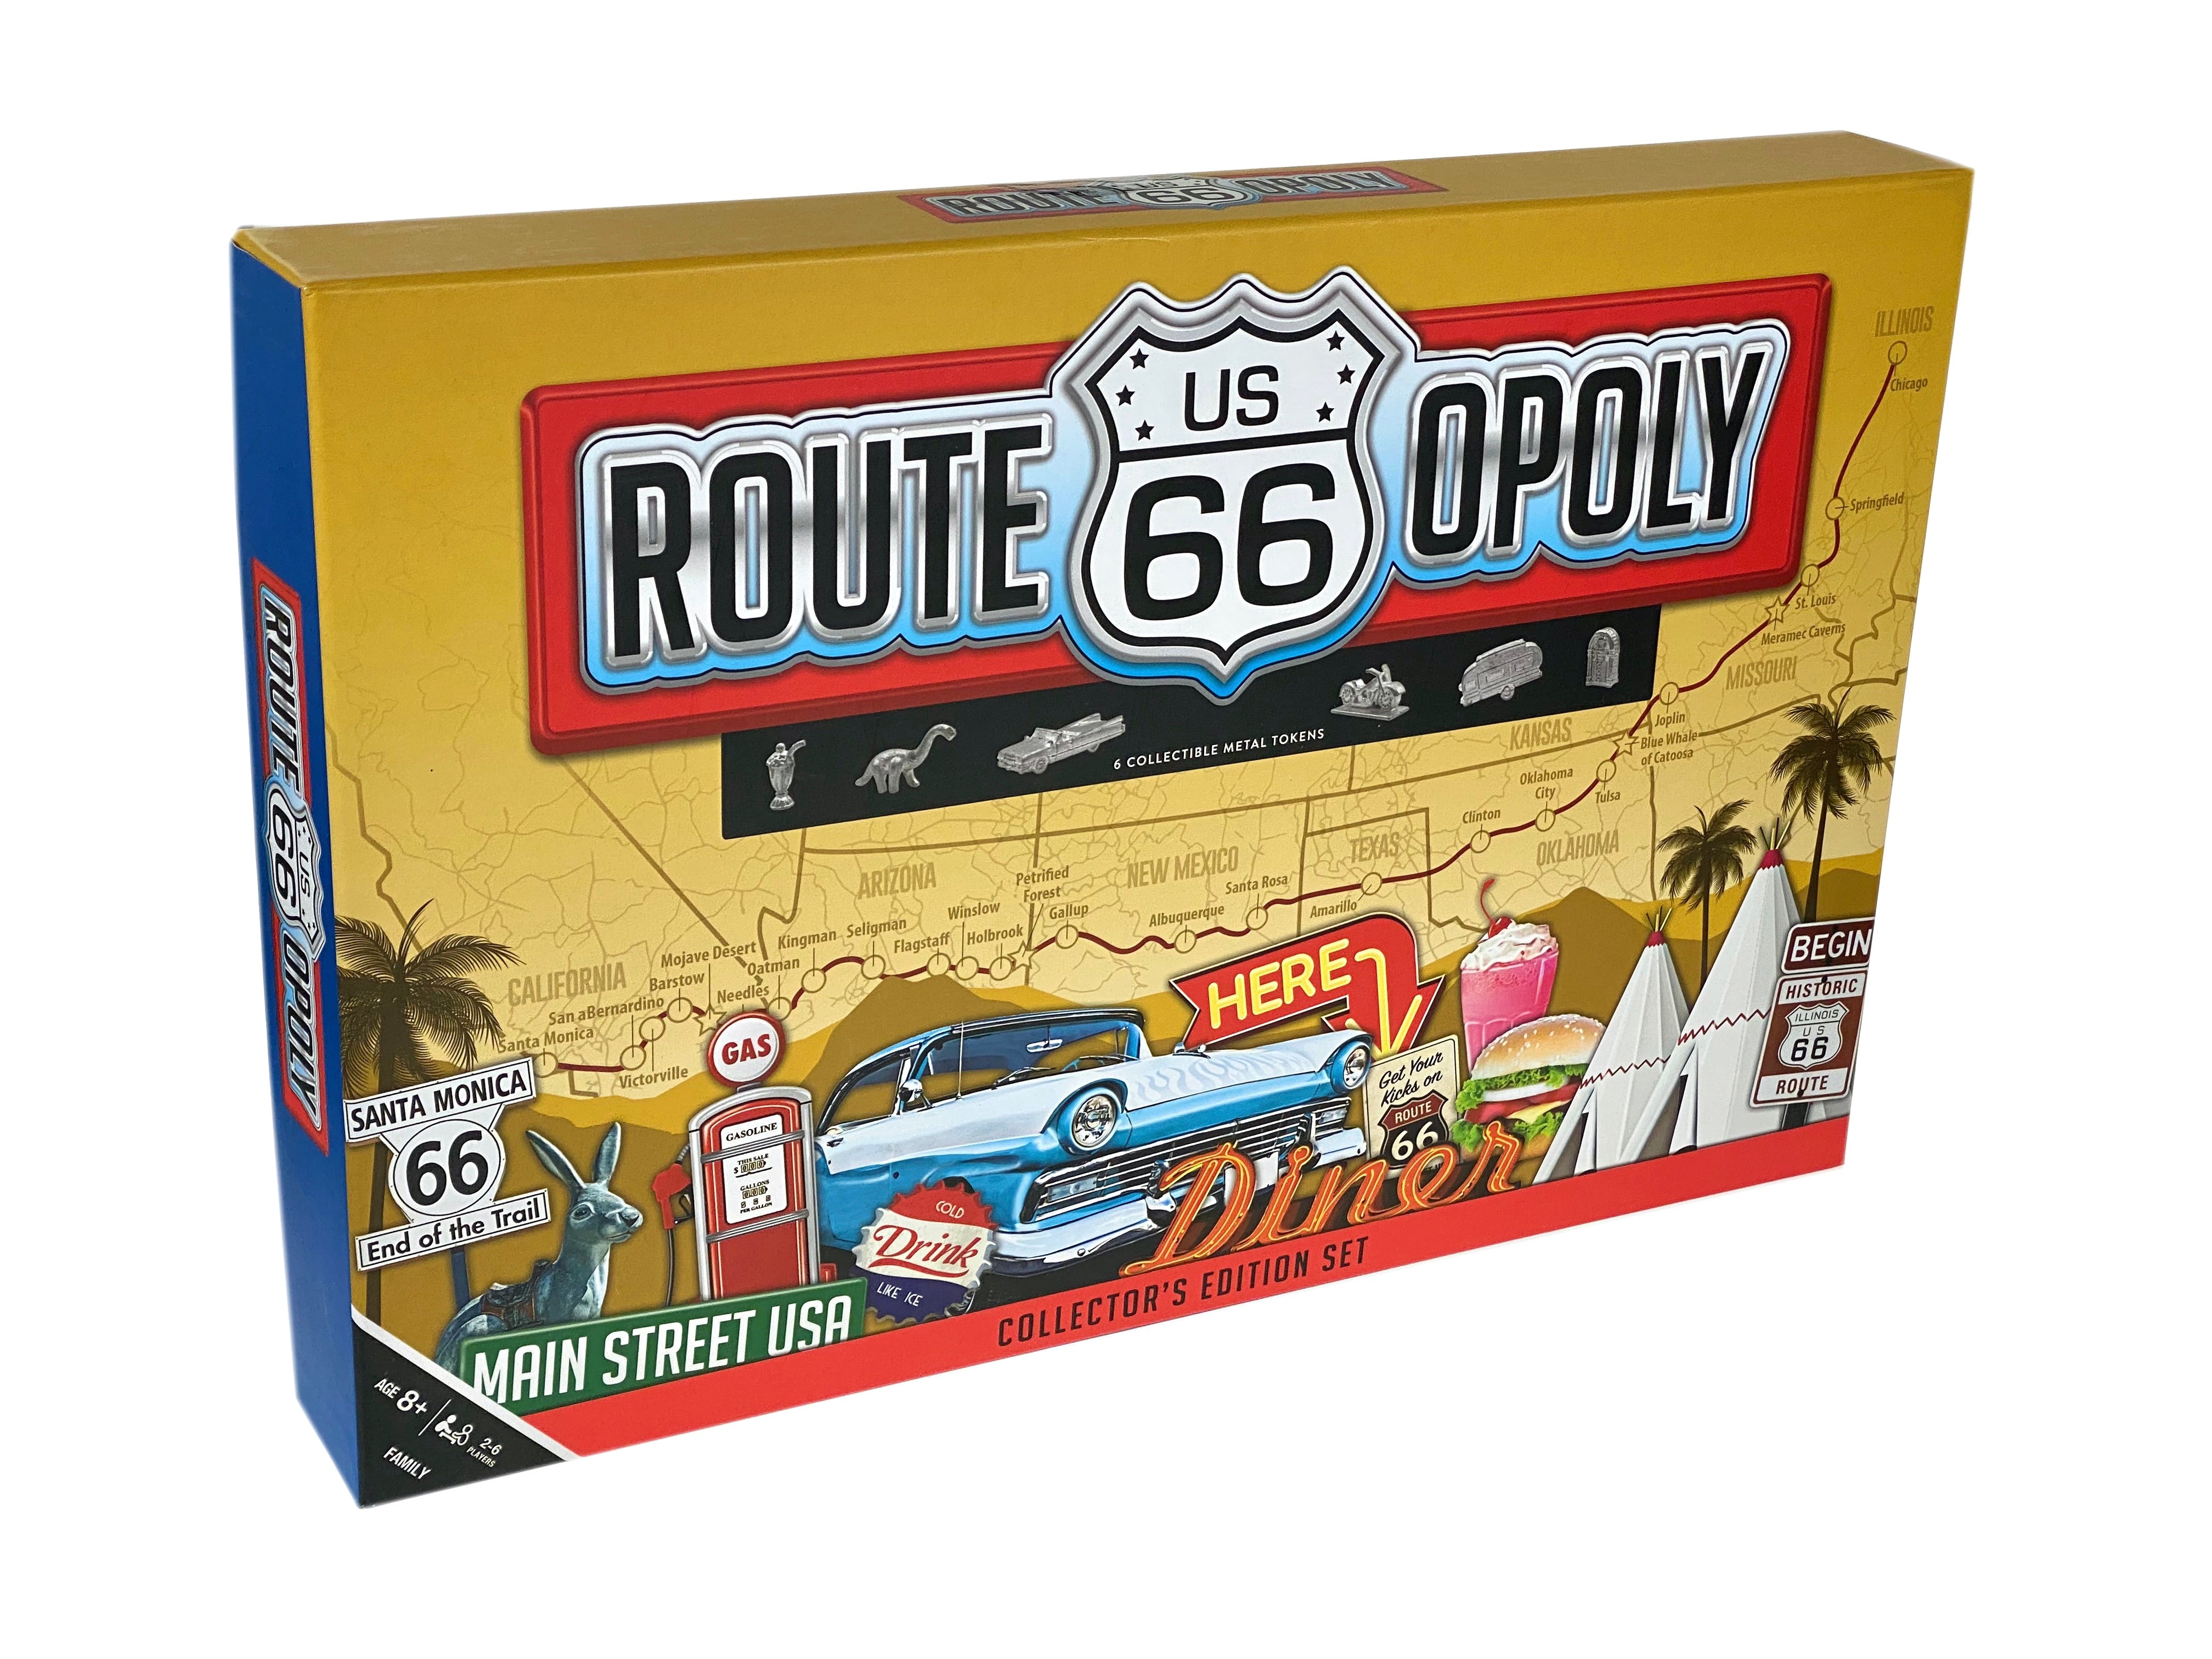 Route 66 Opoloy    